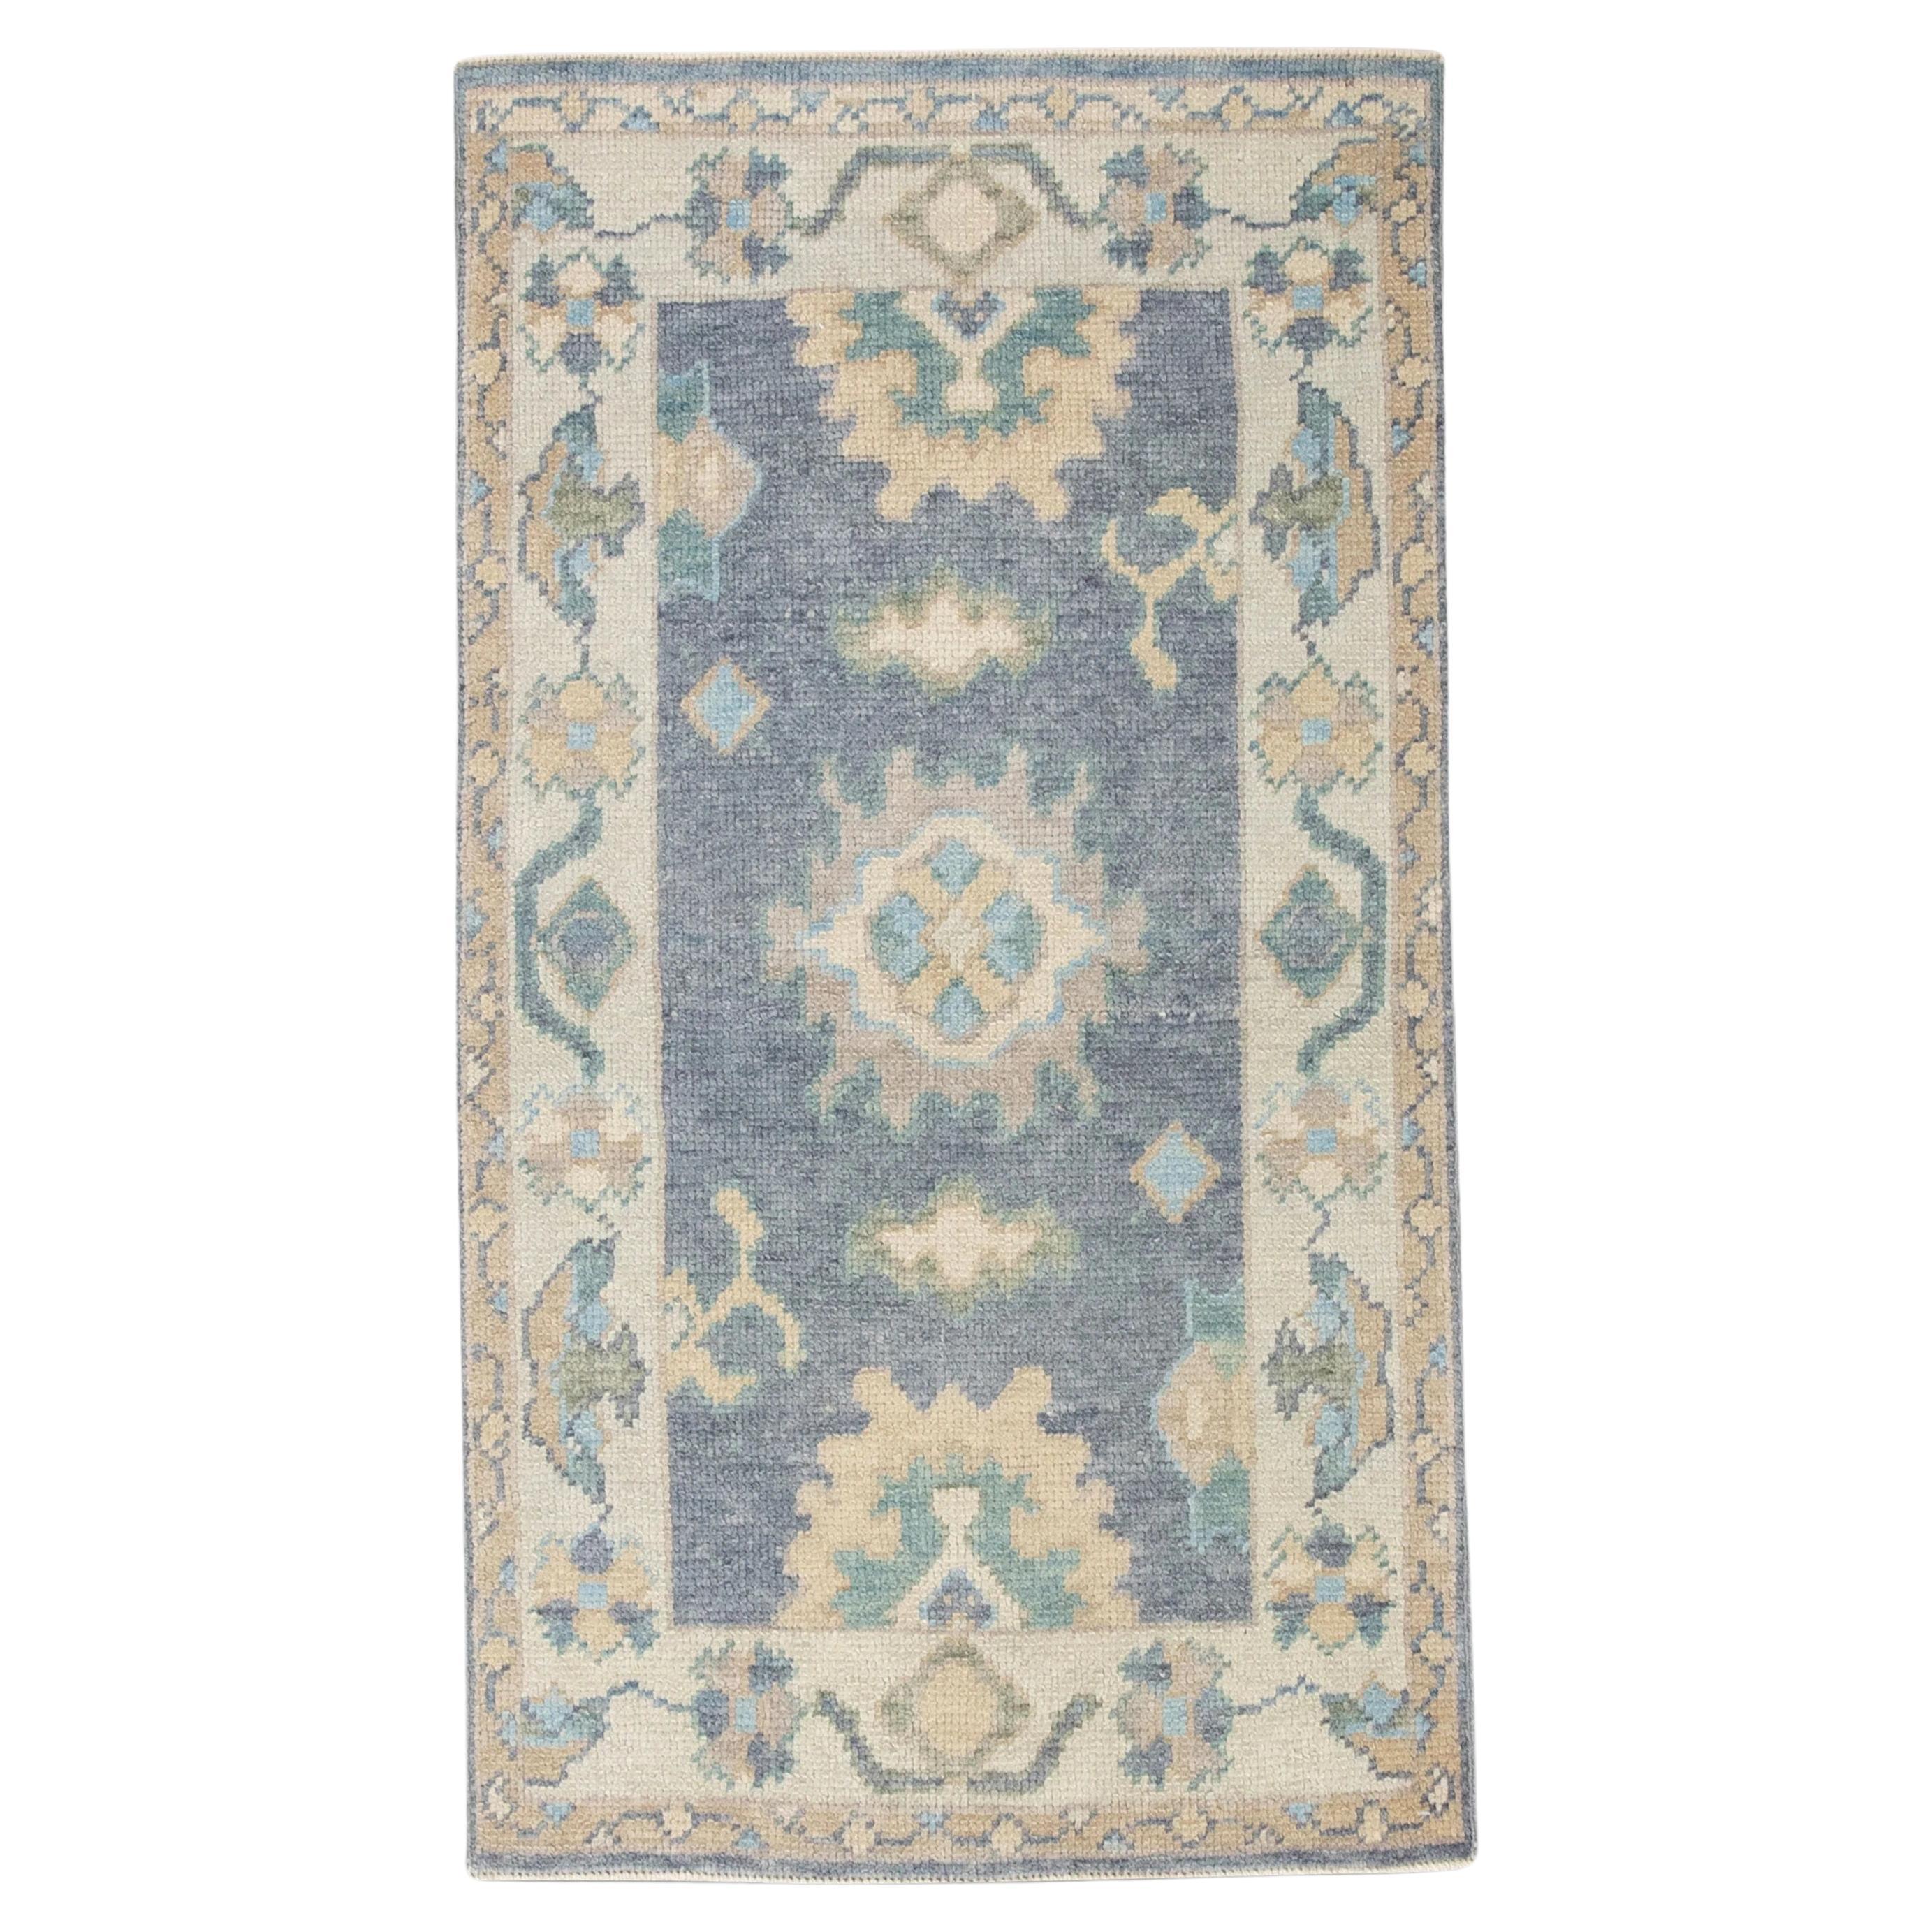 Floral Handwoven Wool Turkish Oushak Rug in Gray, Blue, & Orange 2'3" x 4'2" For Sale